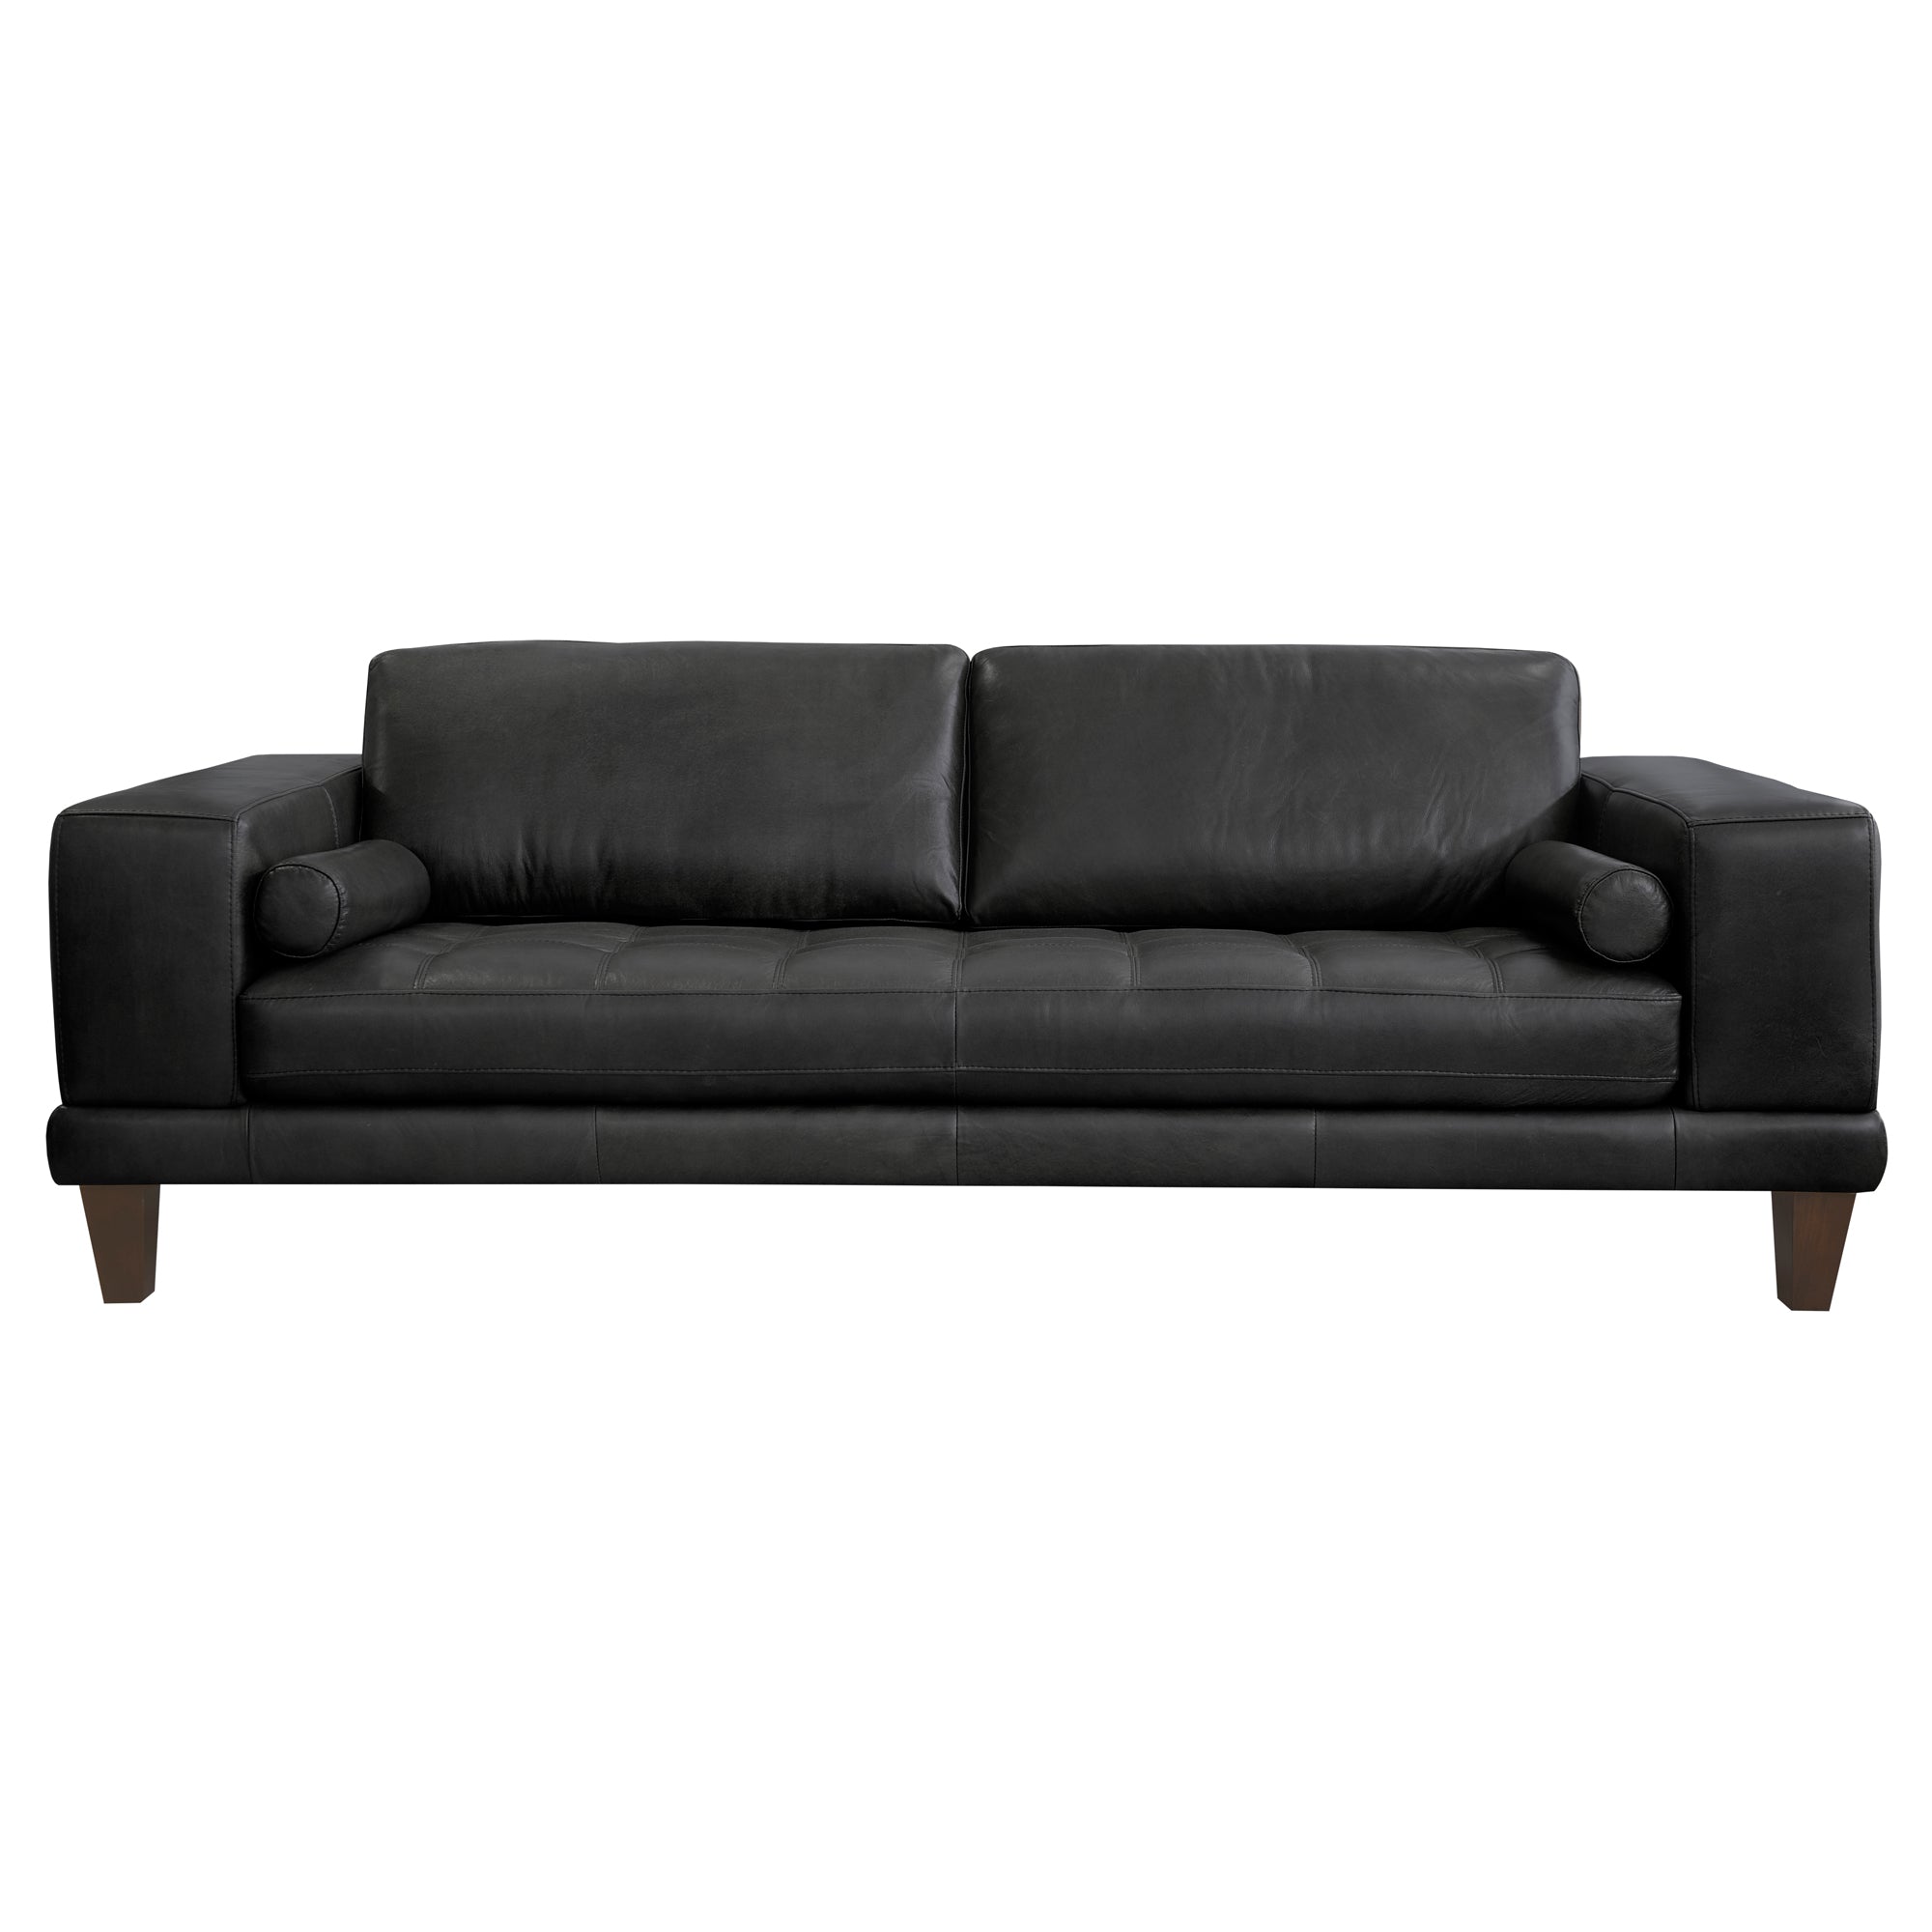 Armen Living Lcwy3black Wynne Contemporary Sofa In Genuine Black Leather With Brown Wood Legs